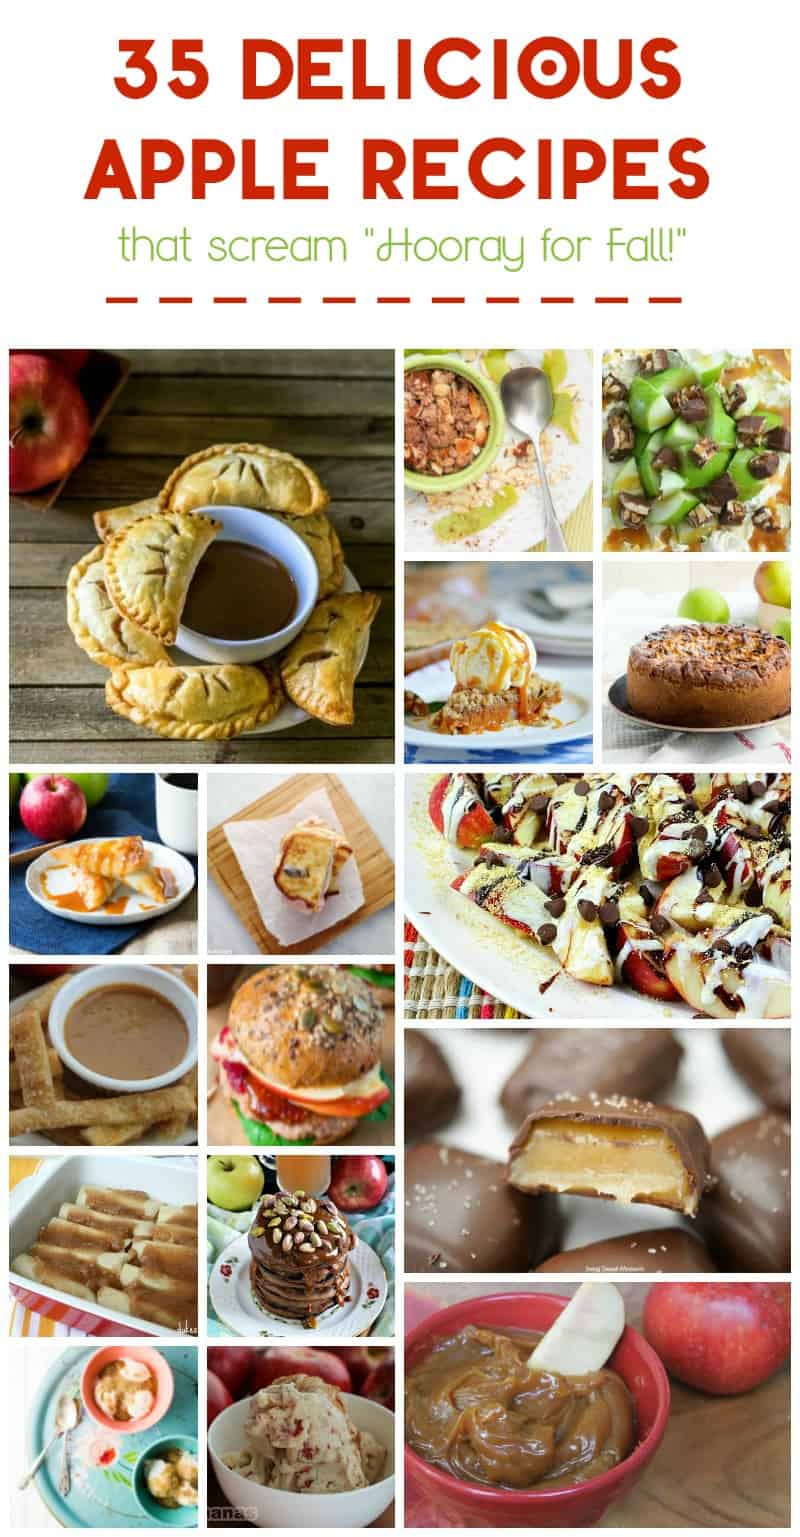 Celebrate fall's harvest with 35 outstandingly delicious apple recipes! From breakfast to dessert (yep, even lunch and dinner), apples are where it's at!